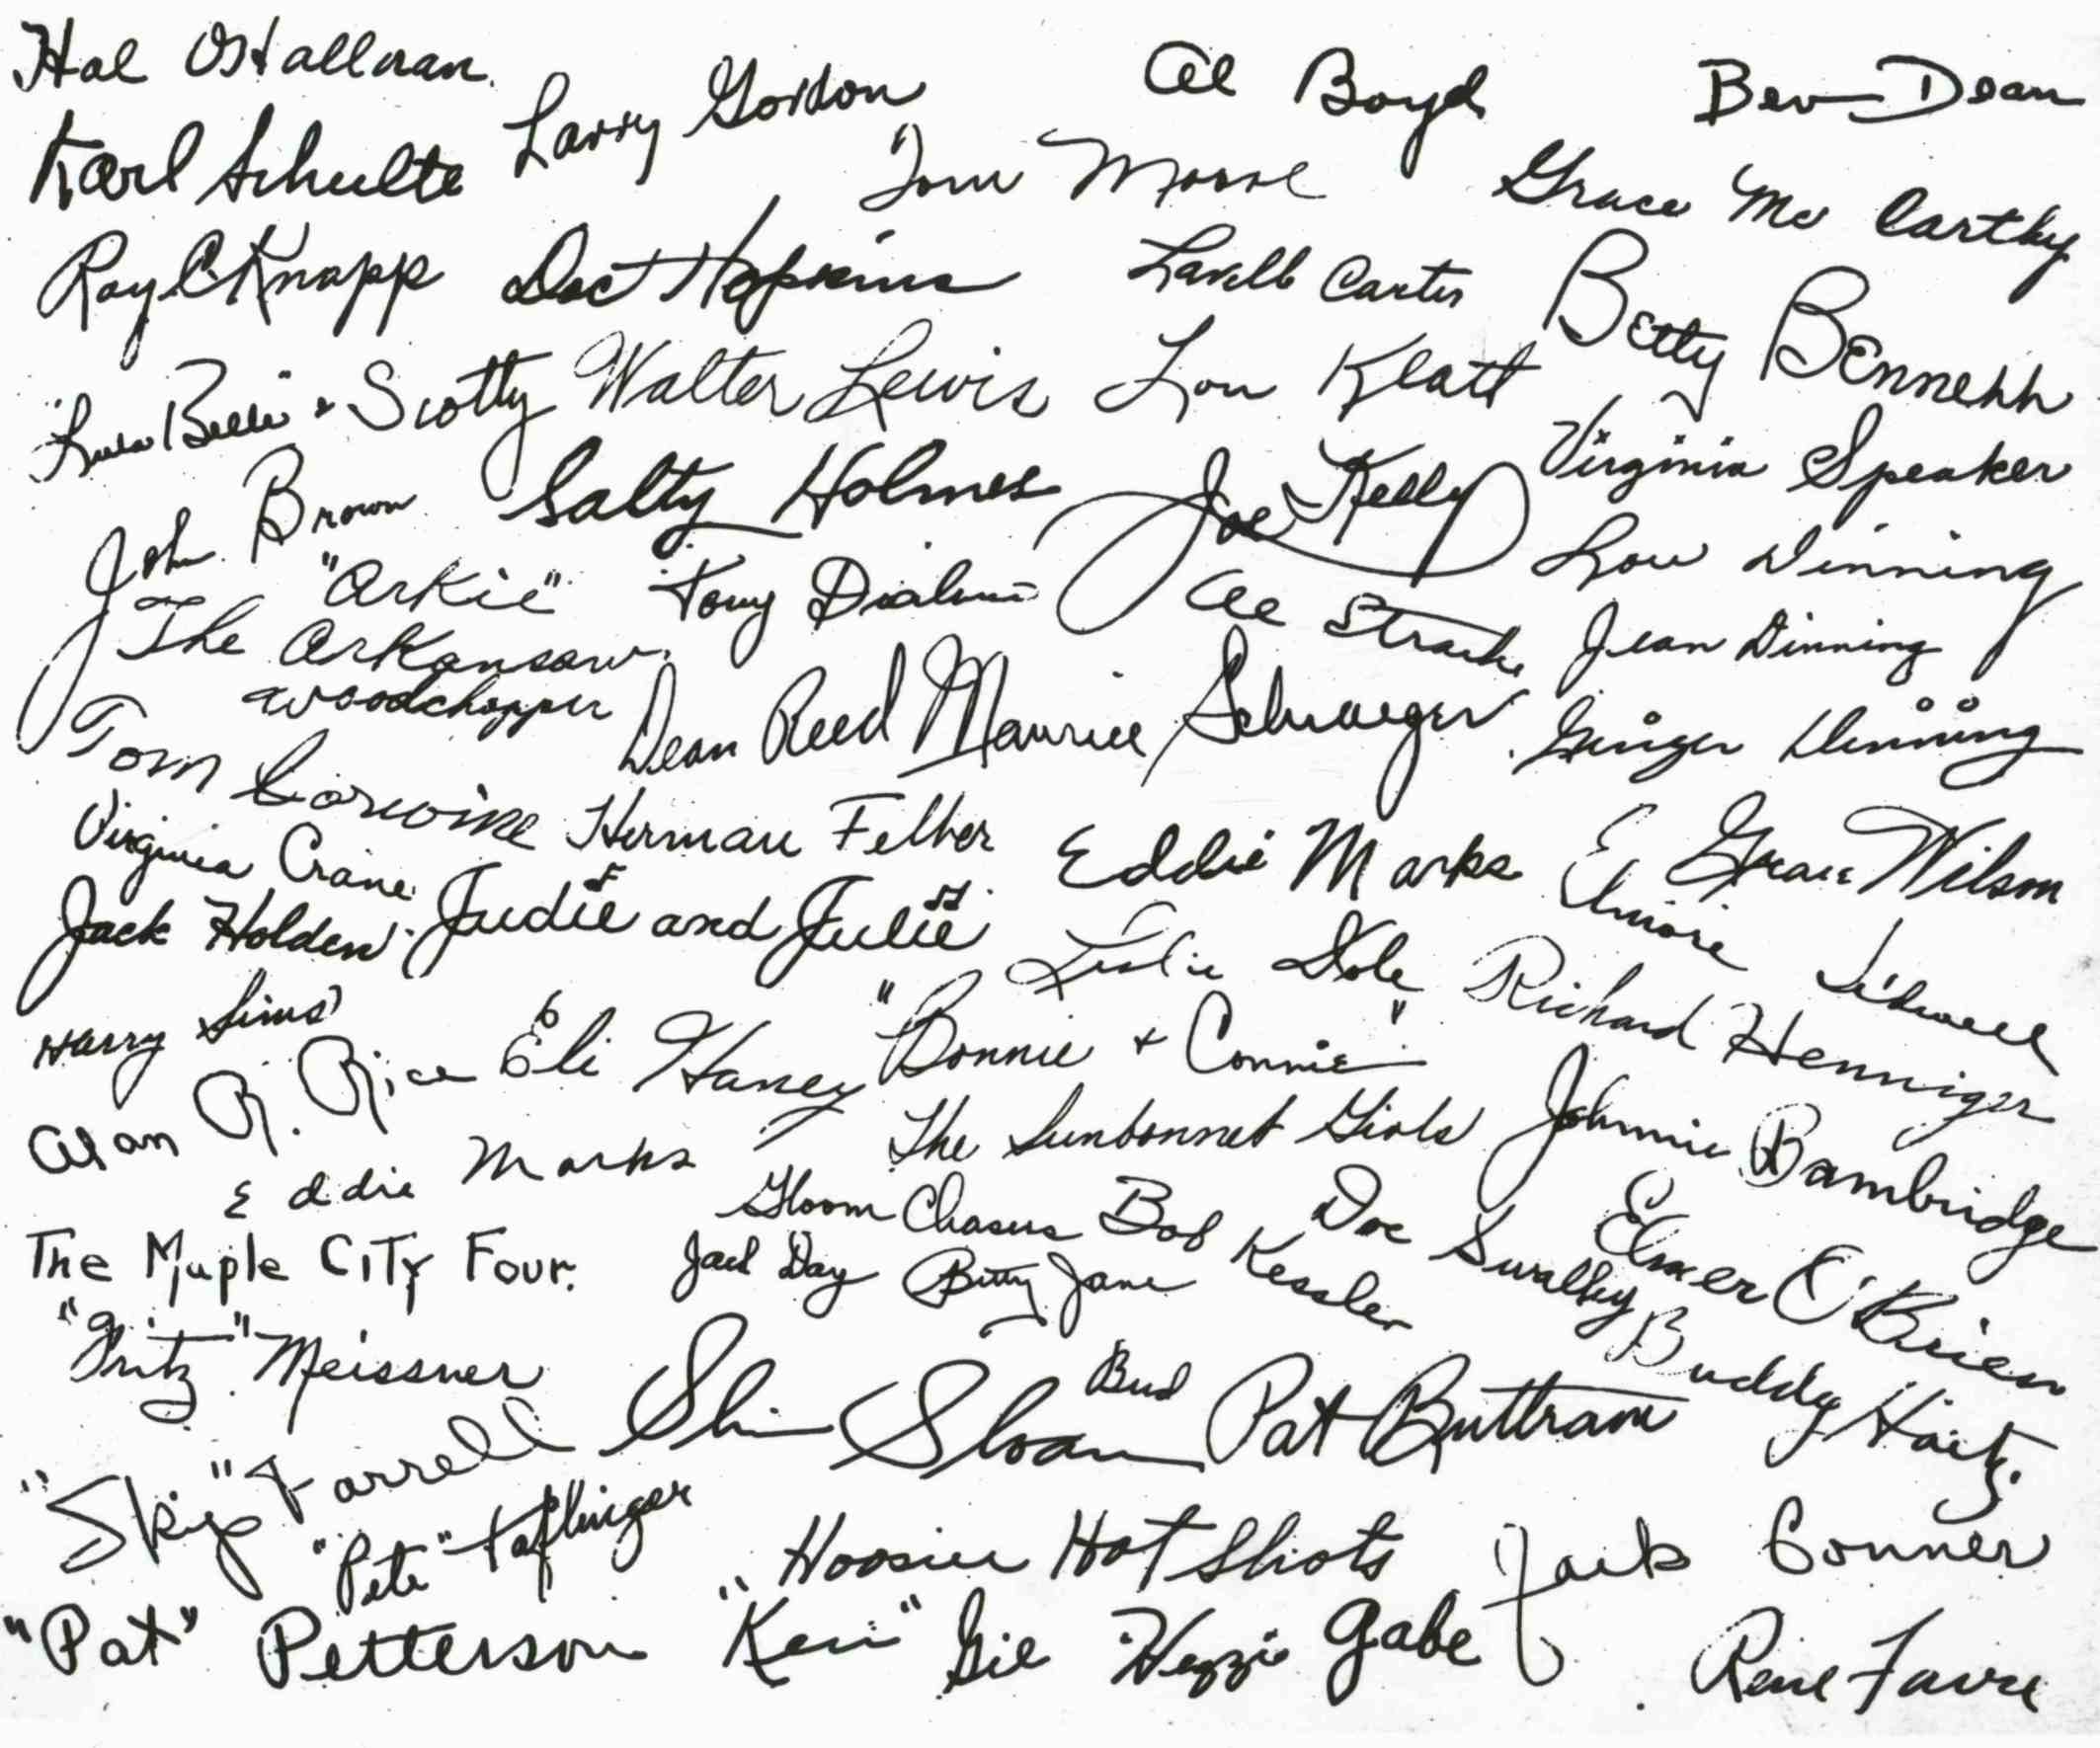 Autographs Of Members Of The WLS National Barn Dance